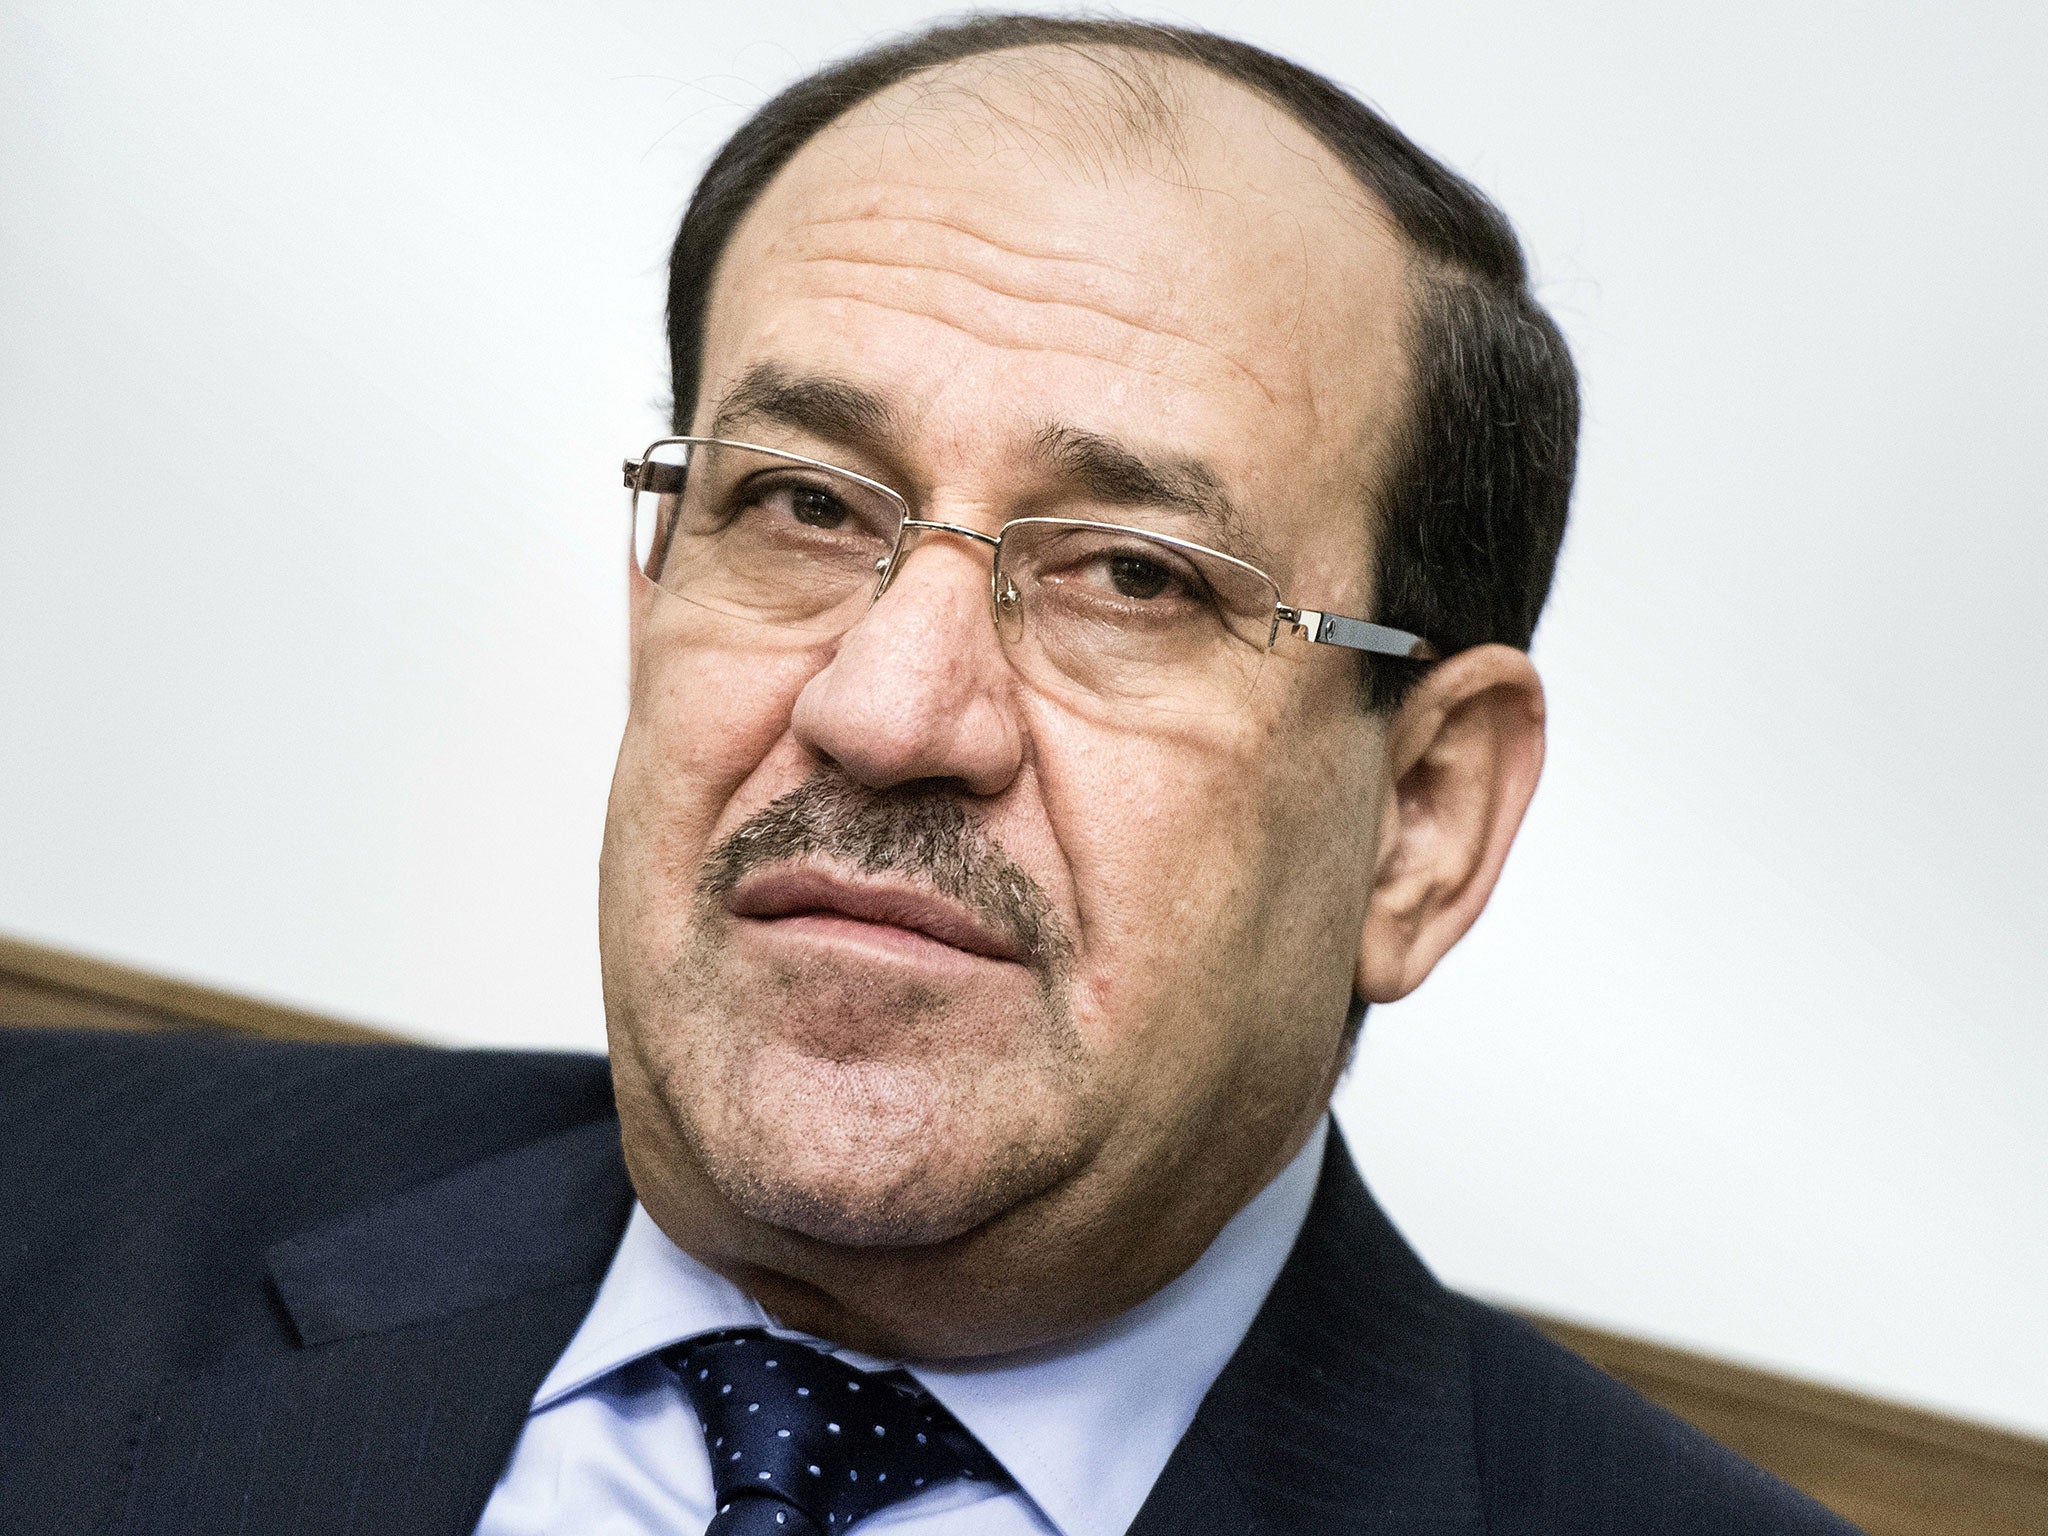 Al-Maliki says the execution will spell the end for the Saudi government